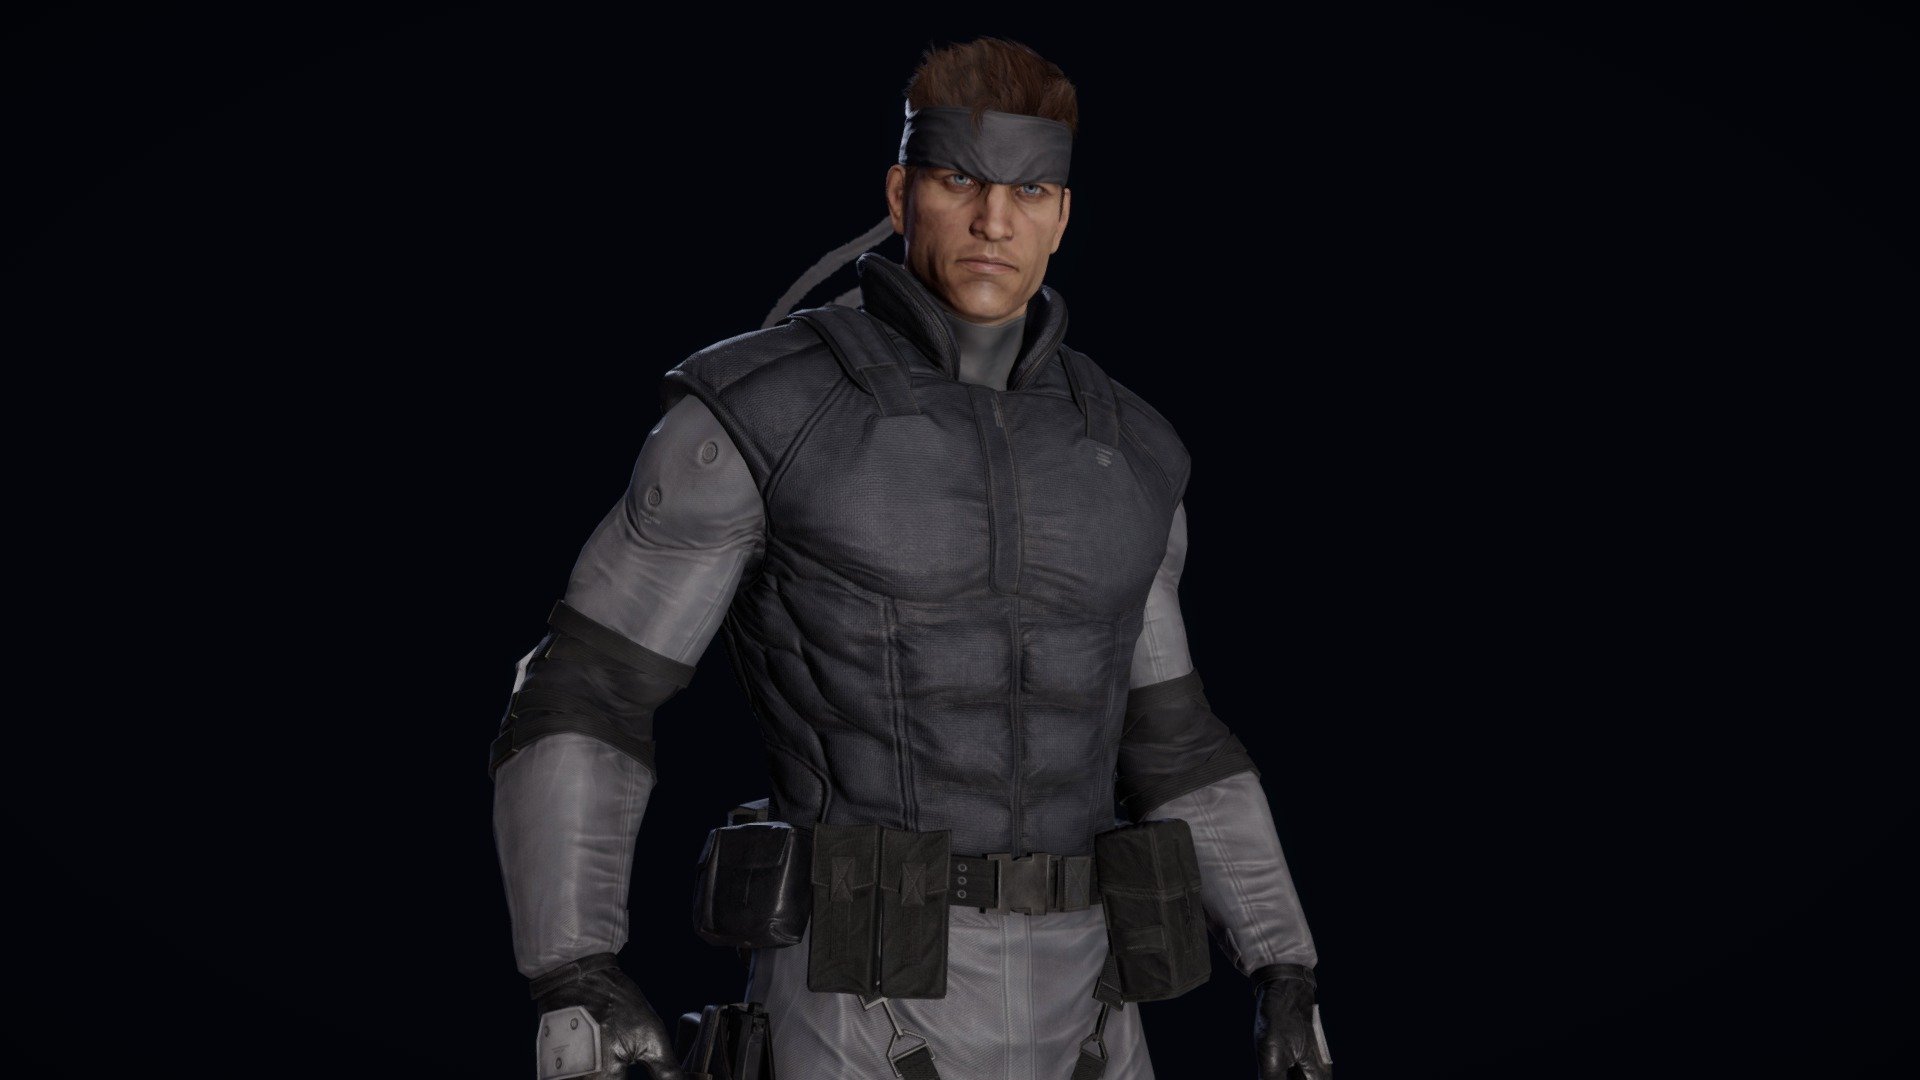 My take on Solid Snake in his Metal Gear Solid 1 suit. Like for my Morrowind project, the goal was to create a model with a modern video game worflow, while keeping as much of the original design as possible. 

More renders on my artstation: https://www.artstation.com/laurent_pozzuoli - Solid Snake - Fan art - 3D model by Pozzuoli_Laurent 3d model